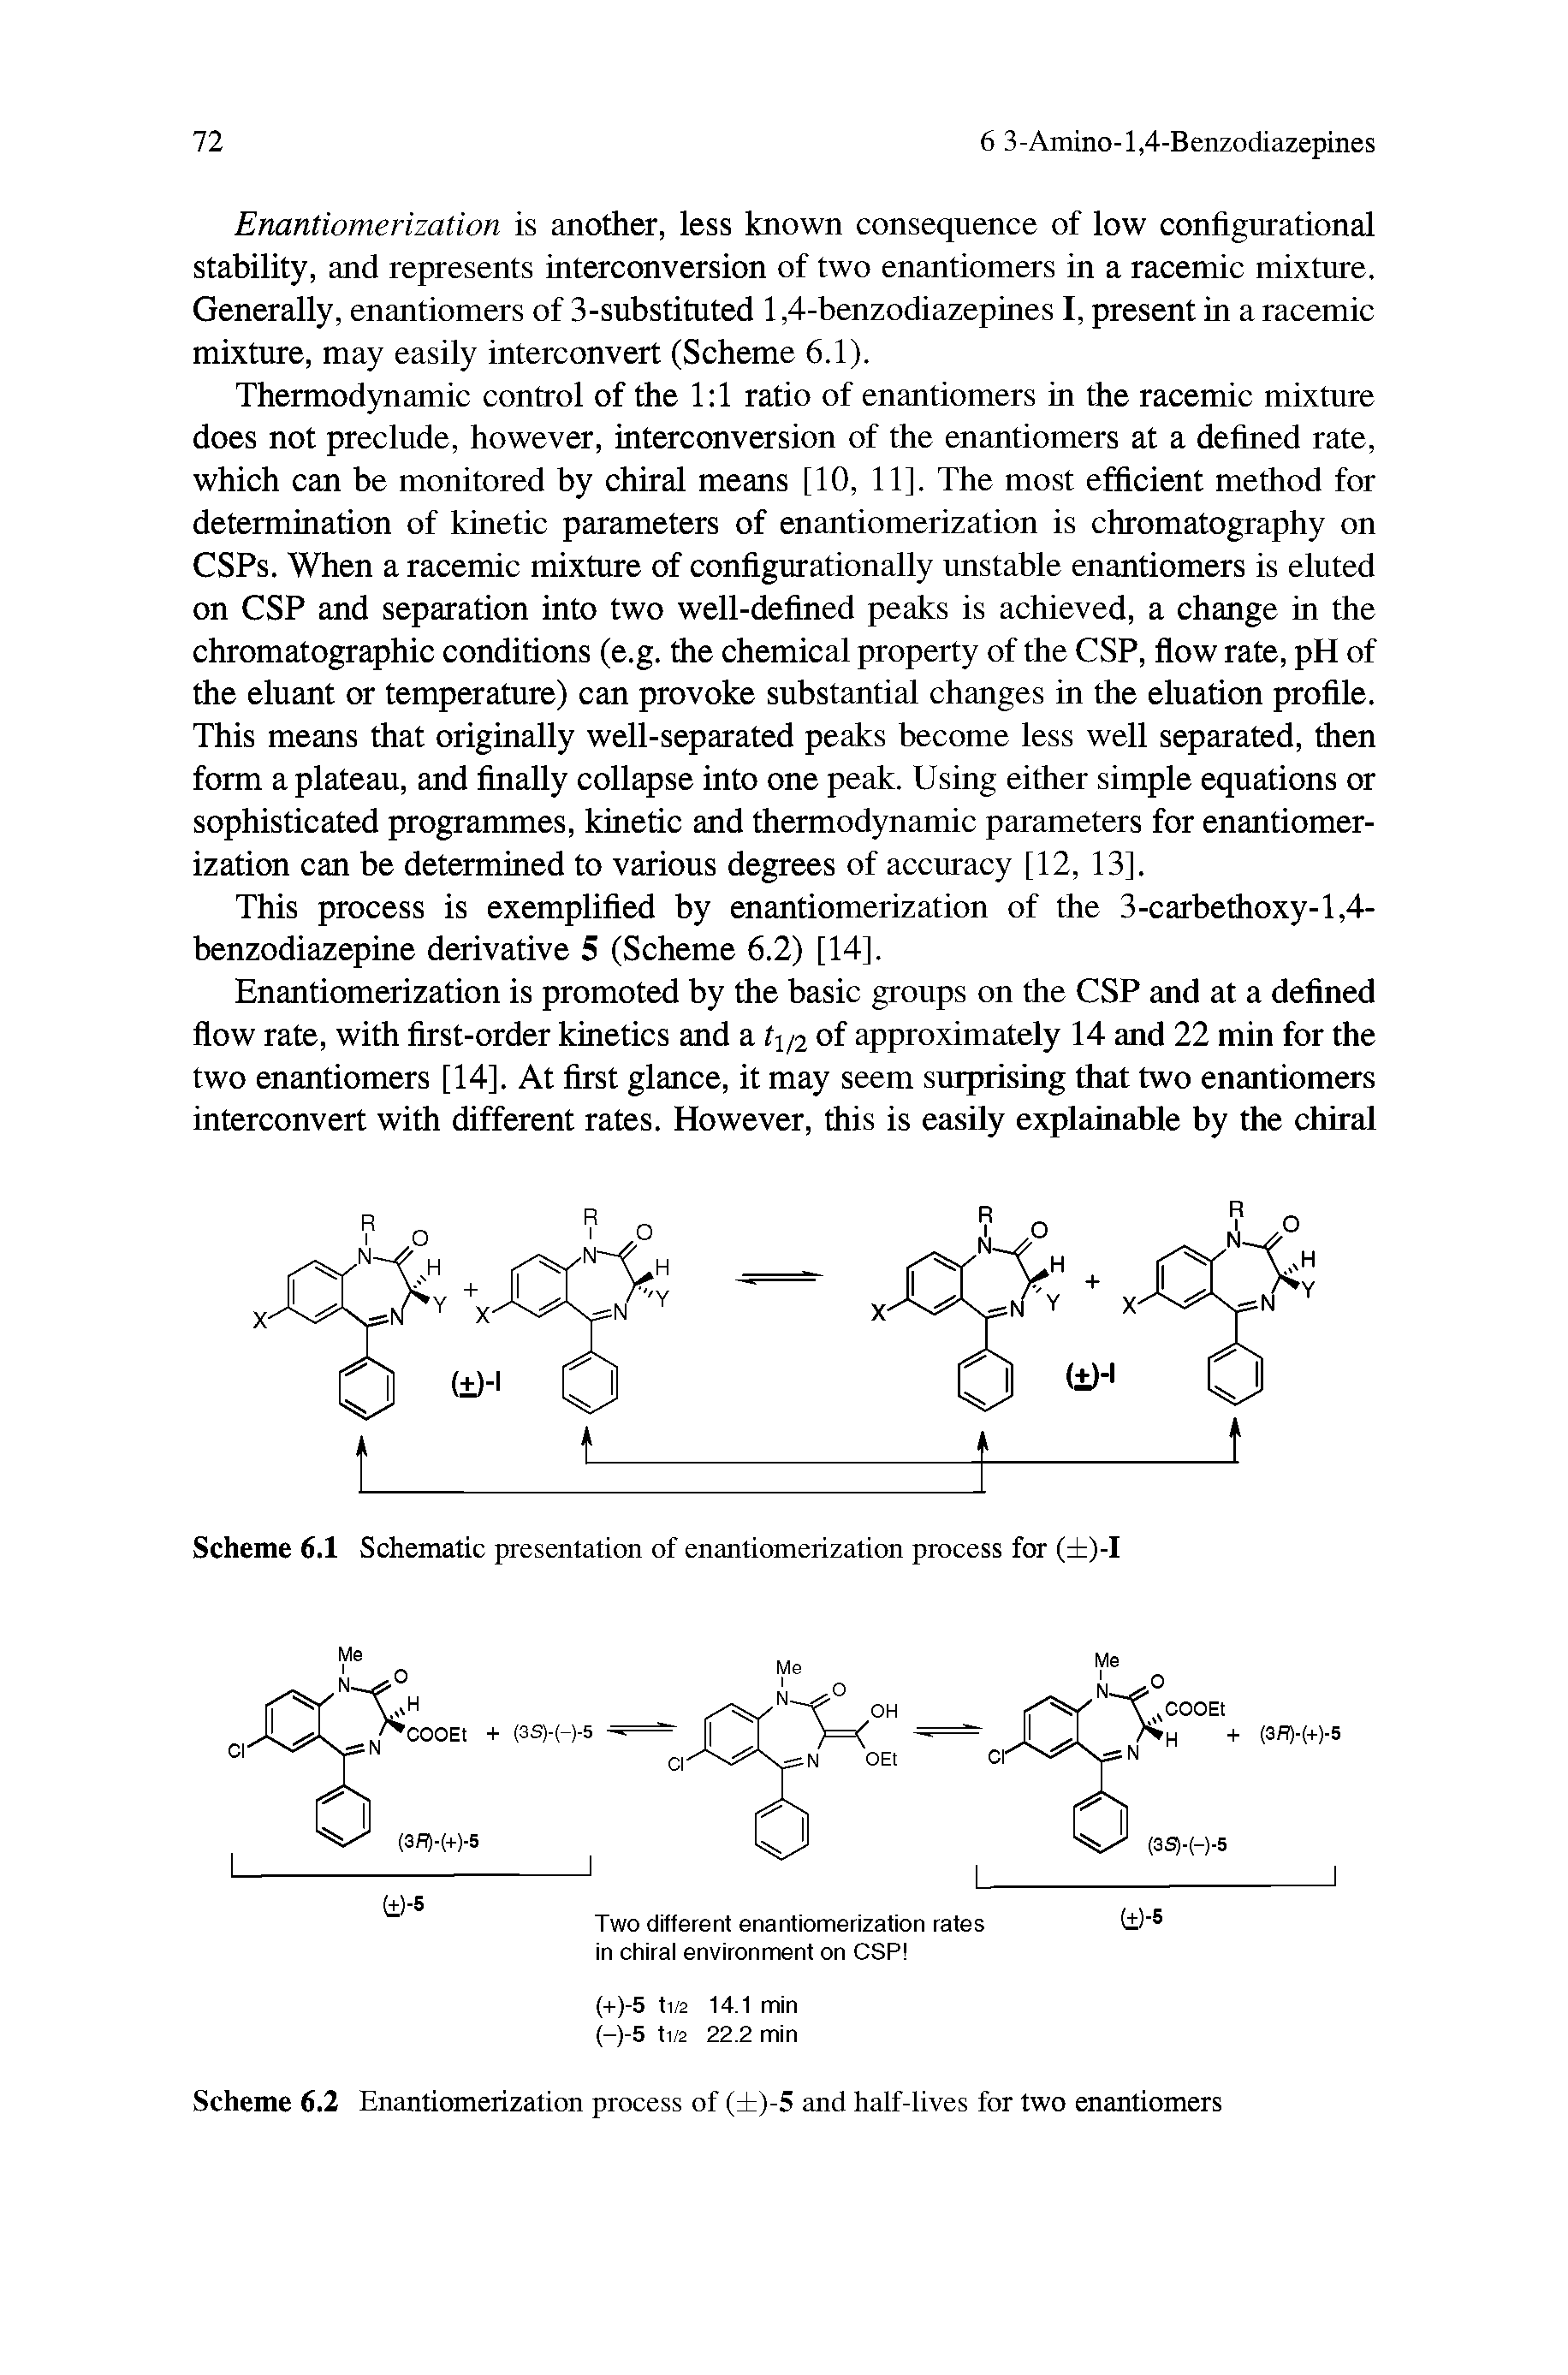 Scheme 6.2 Enantiomerization process of ( )-5 and half-lives for two enantiomers...